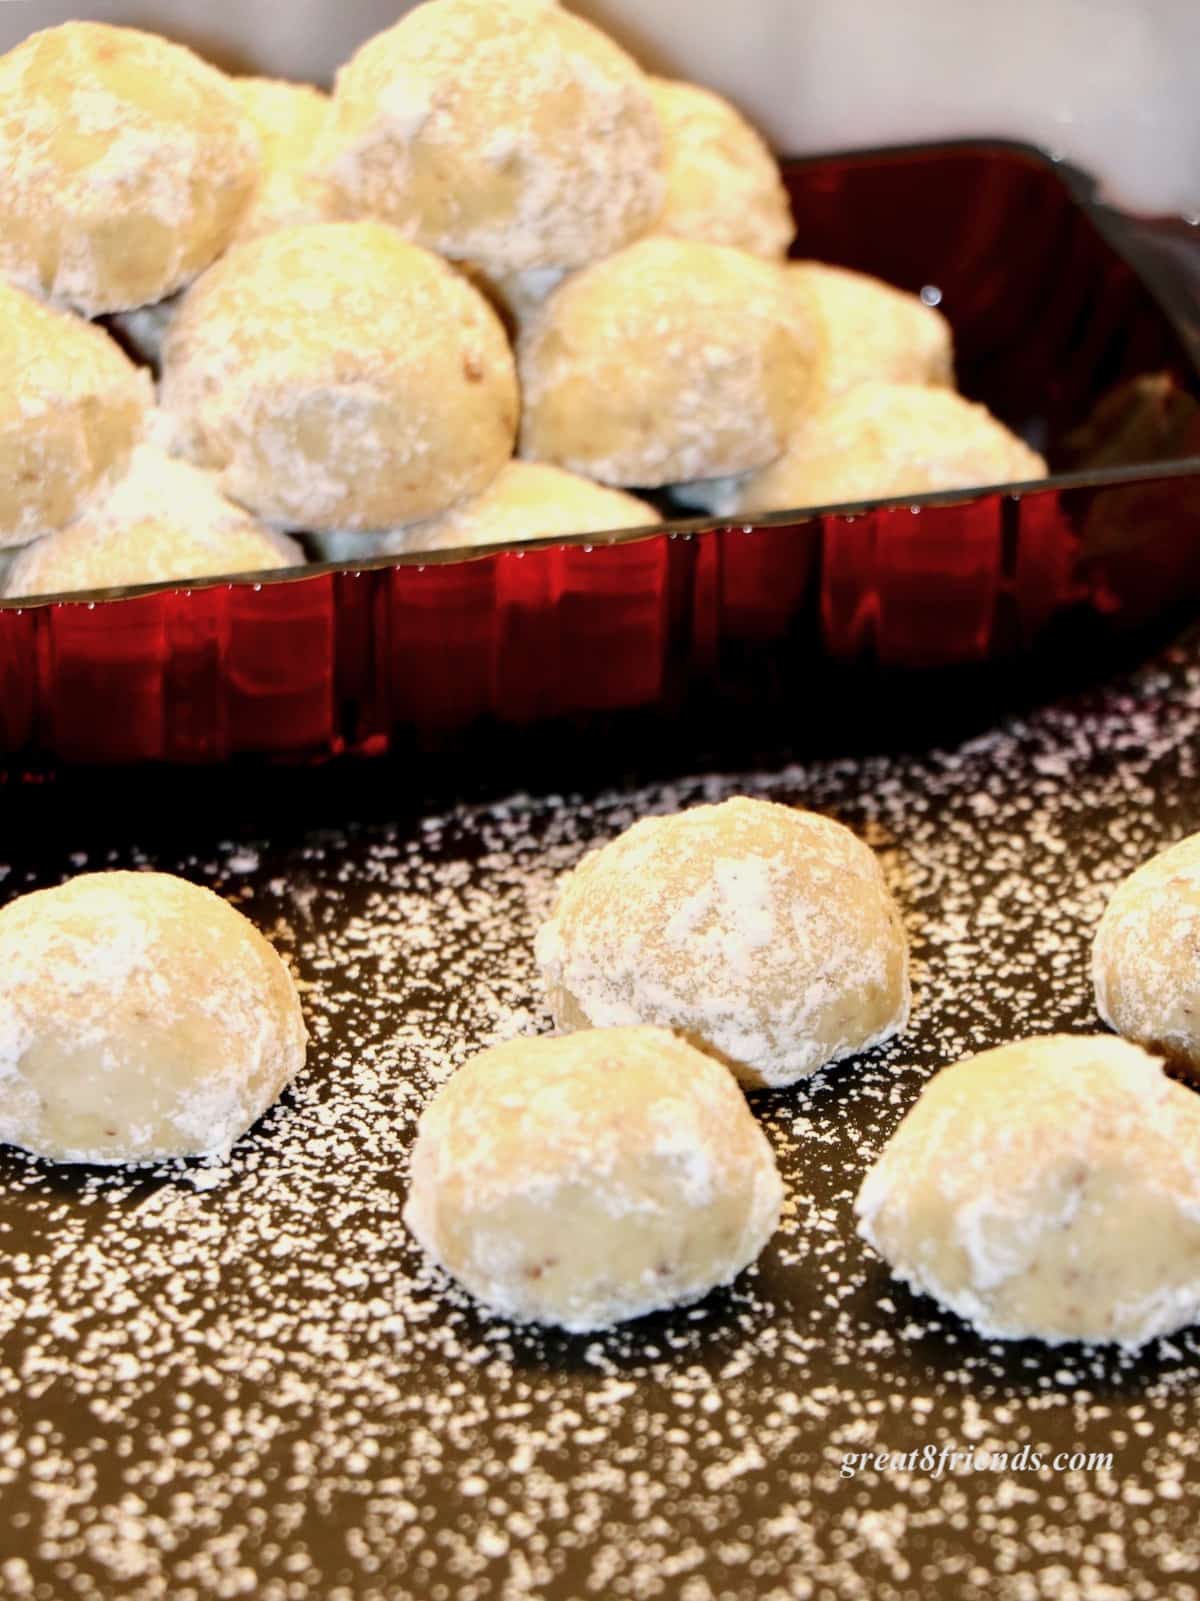 Snowball cookies also called wedding cookies.